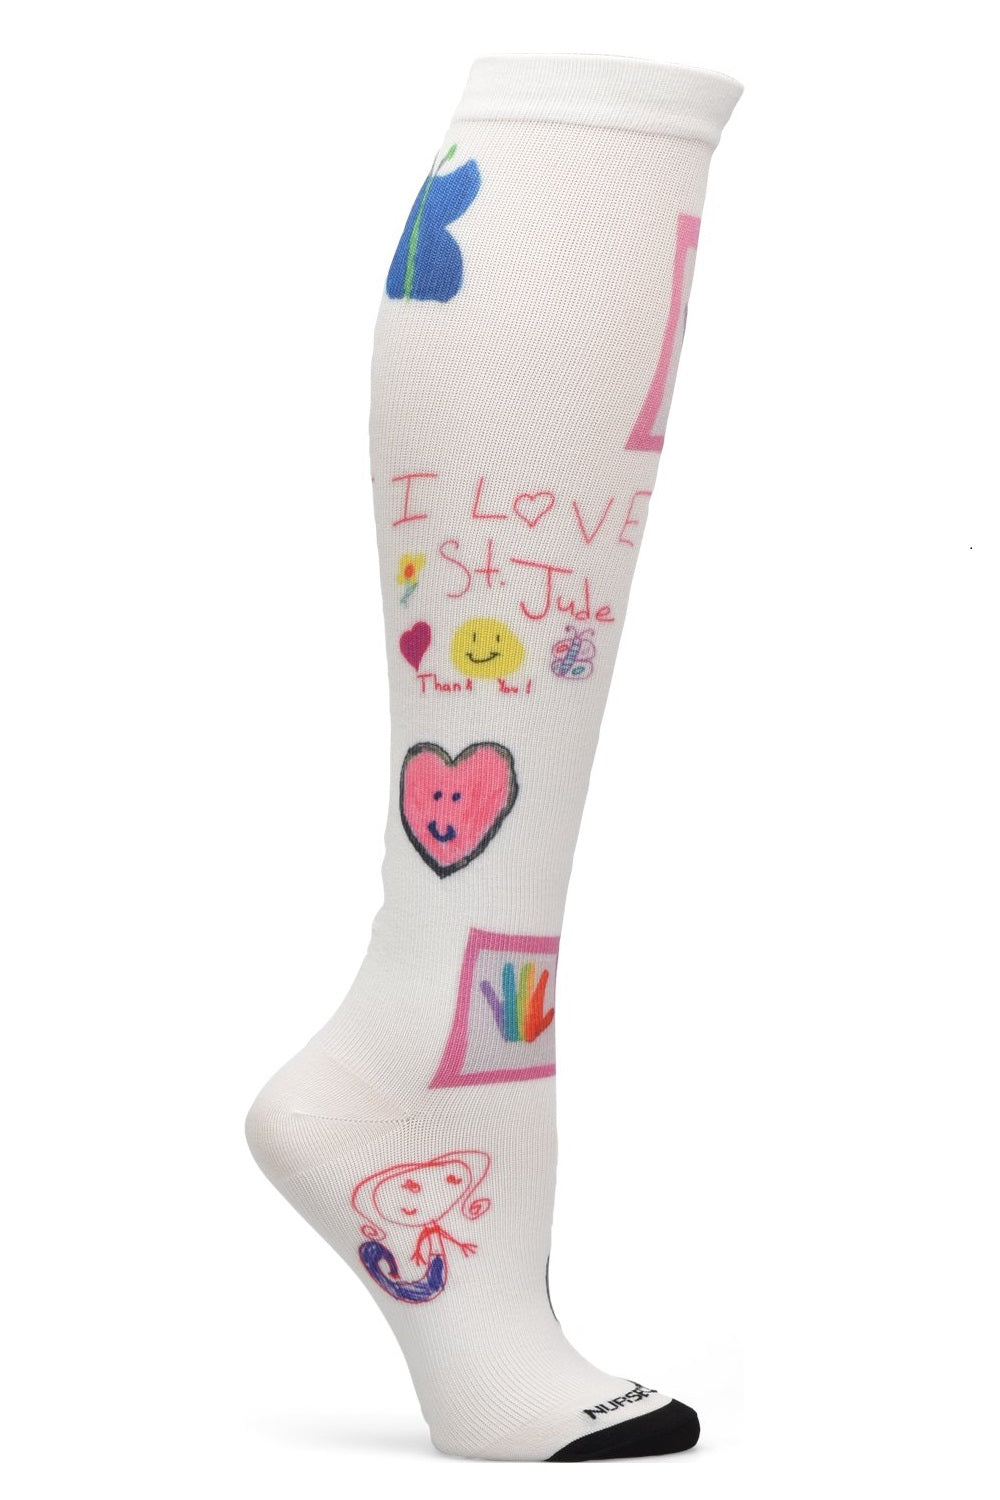 Nurse Mates Mild Compression Socks 360° Seamless 12-14 mmHg at Parker's Clothing and Shoes. St. Jude Kids Art